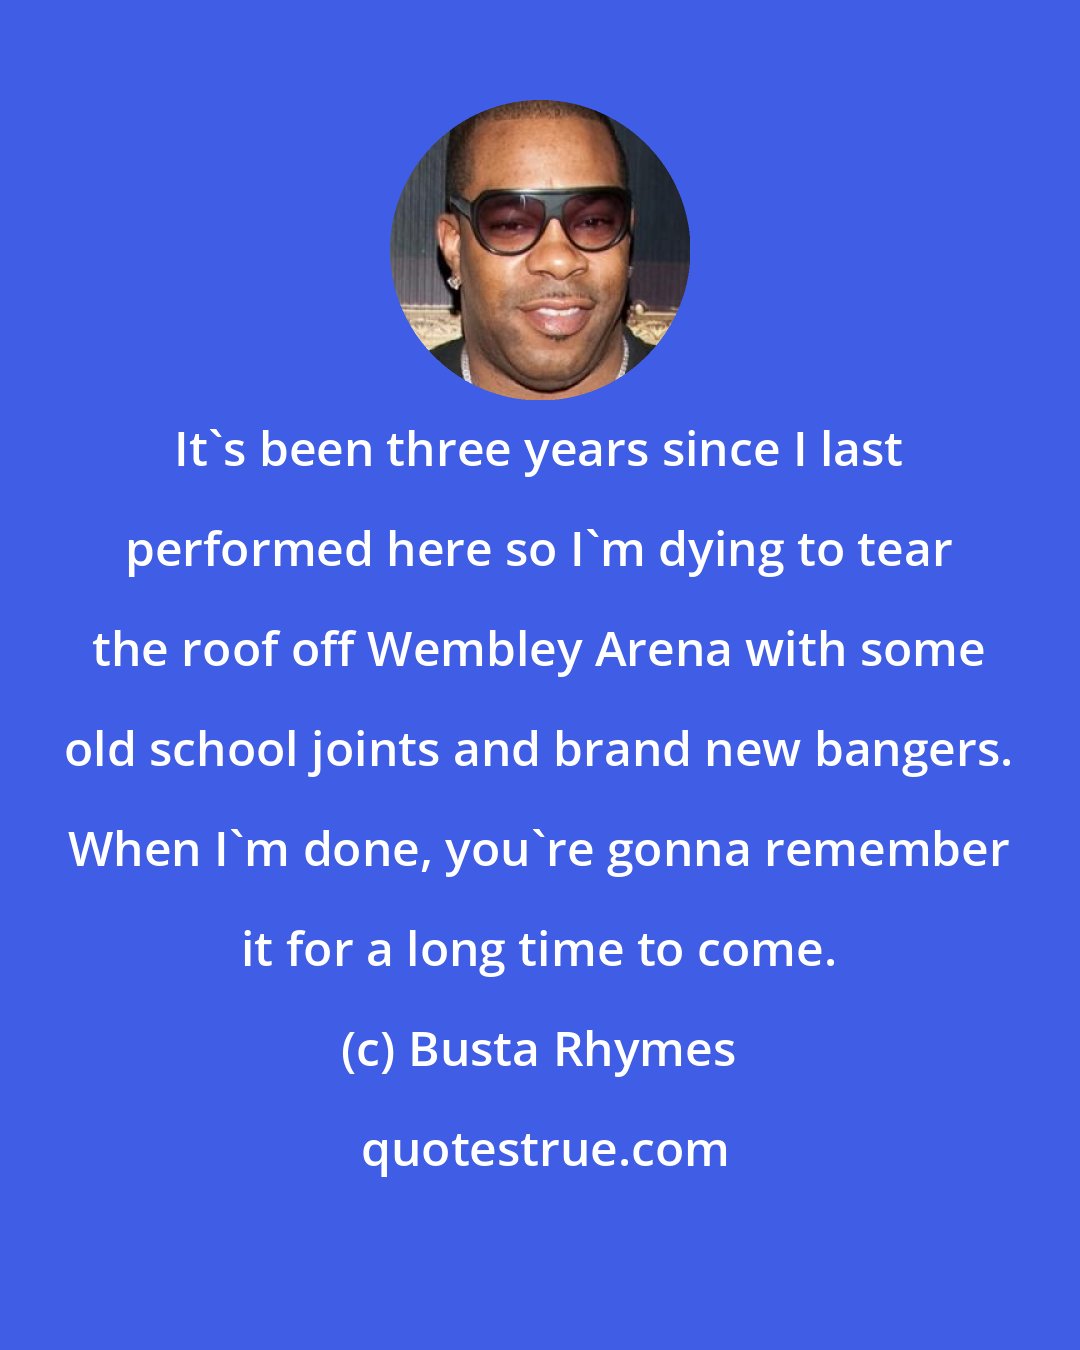 Busta Rhymes: It's been three years since I last performed here so I'm dying to tear the roof off Wembley Arena with some old school joints and brand new bangers. When I'm done, you're gonna remember it for a long time to come.